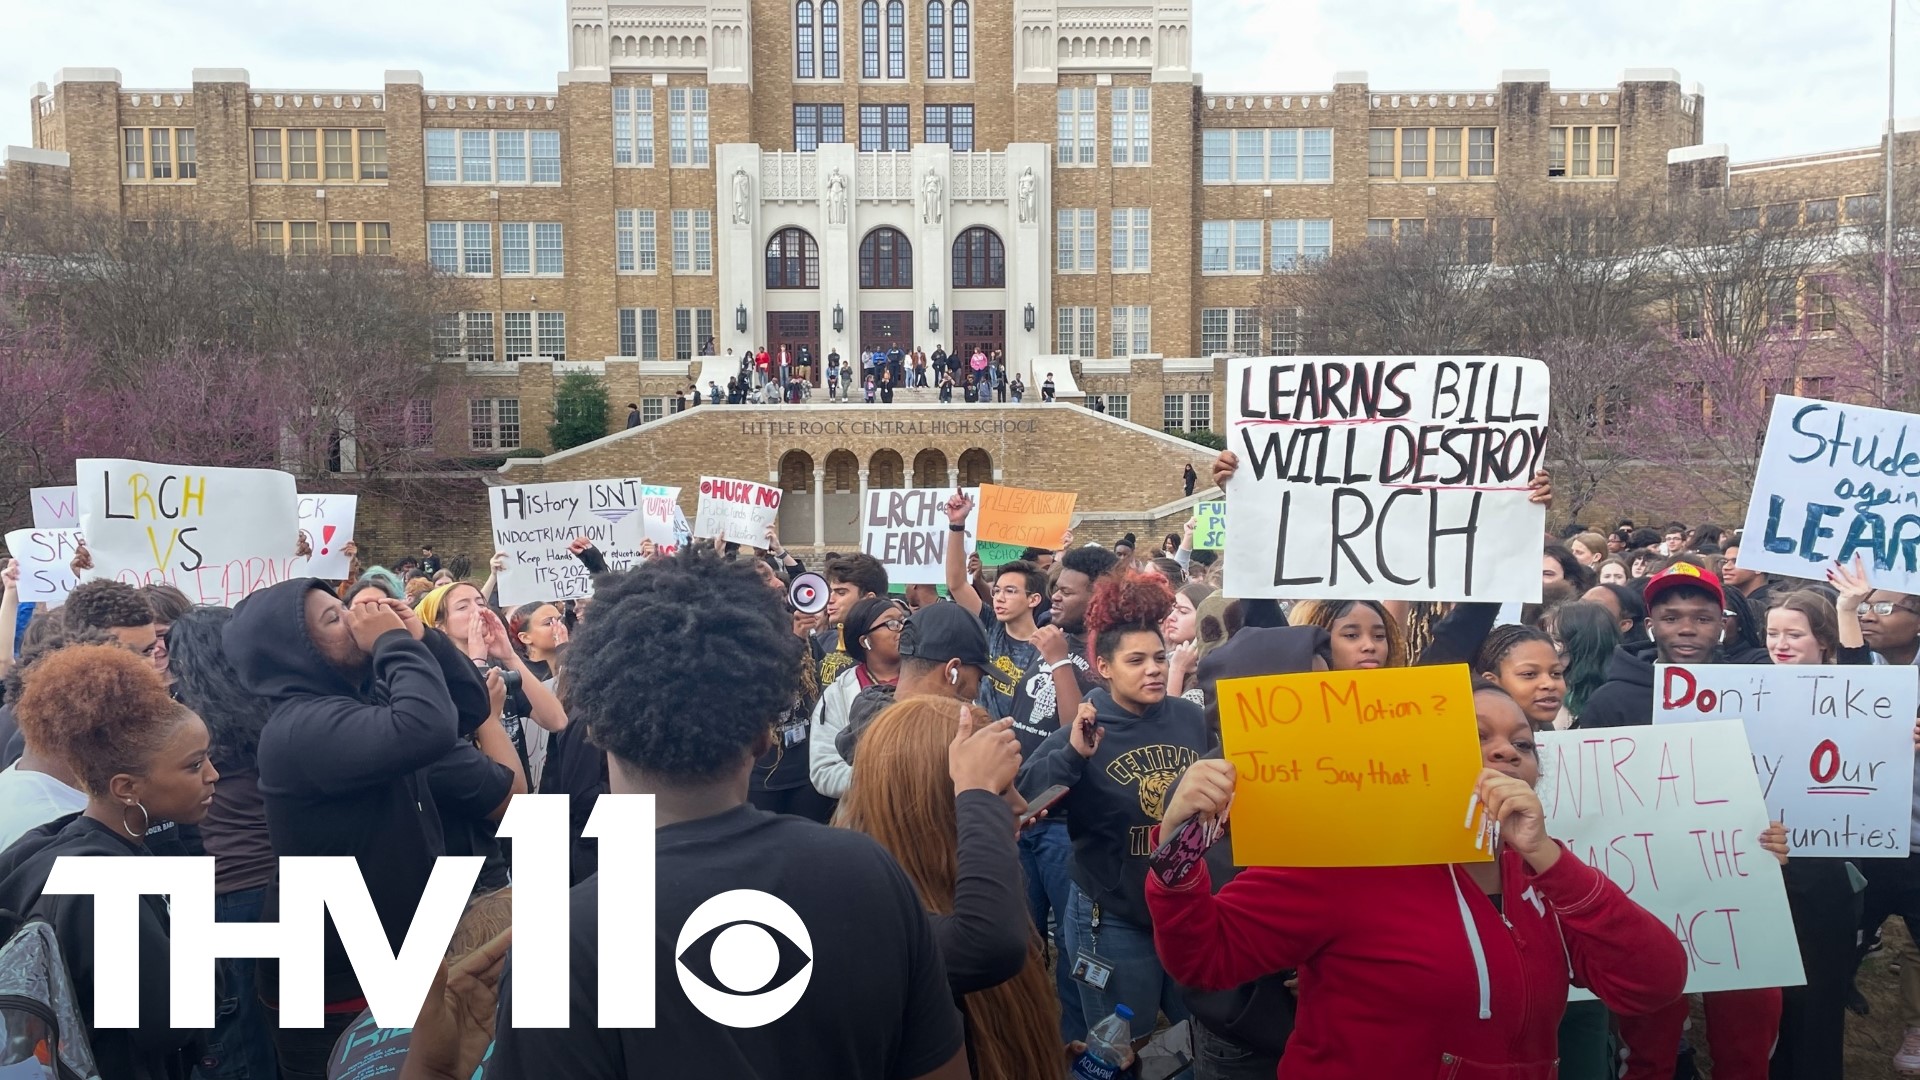 Numerous Little Rock Central High School students completed a walkout on Friday in response to Gov. Sarah Sanders’ LEARNS bill and ‘exploitation’ of the school.